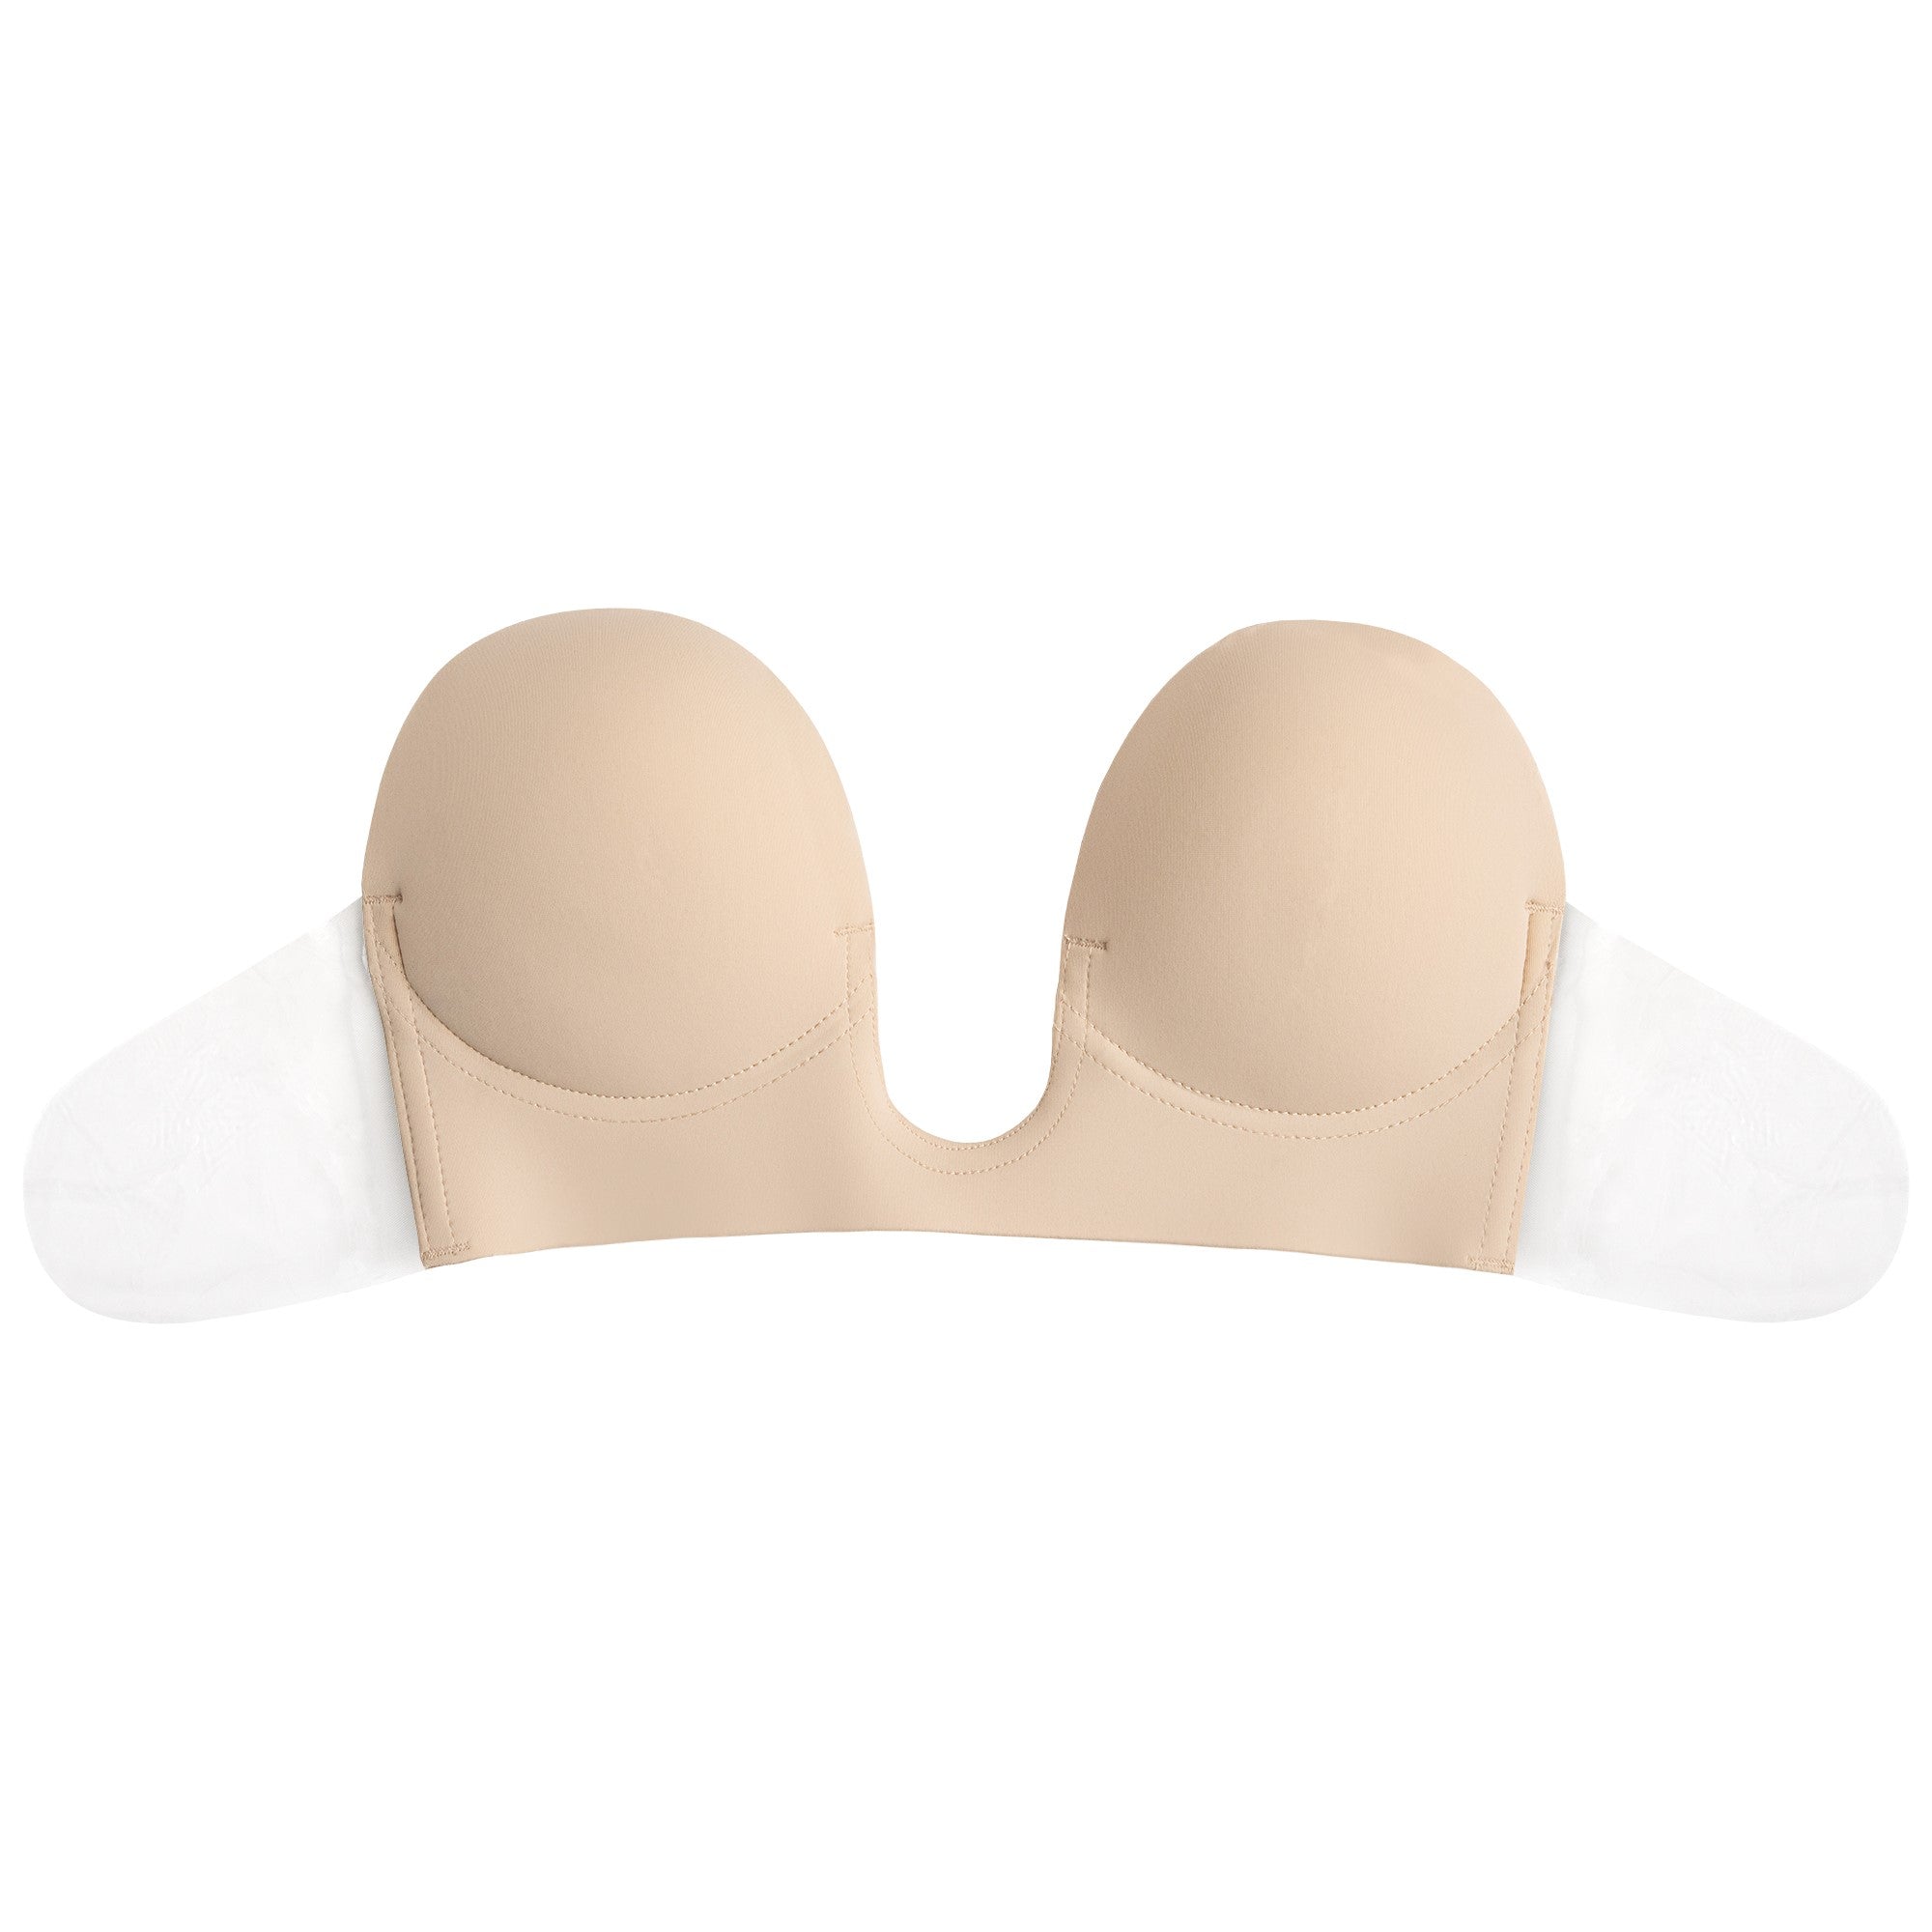 Braza Reveal - Self Adhesive Disposable Backless Strapless Bra - One Size